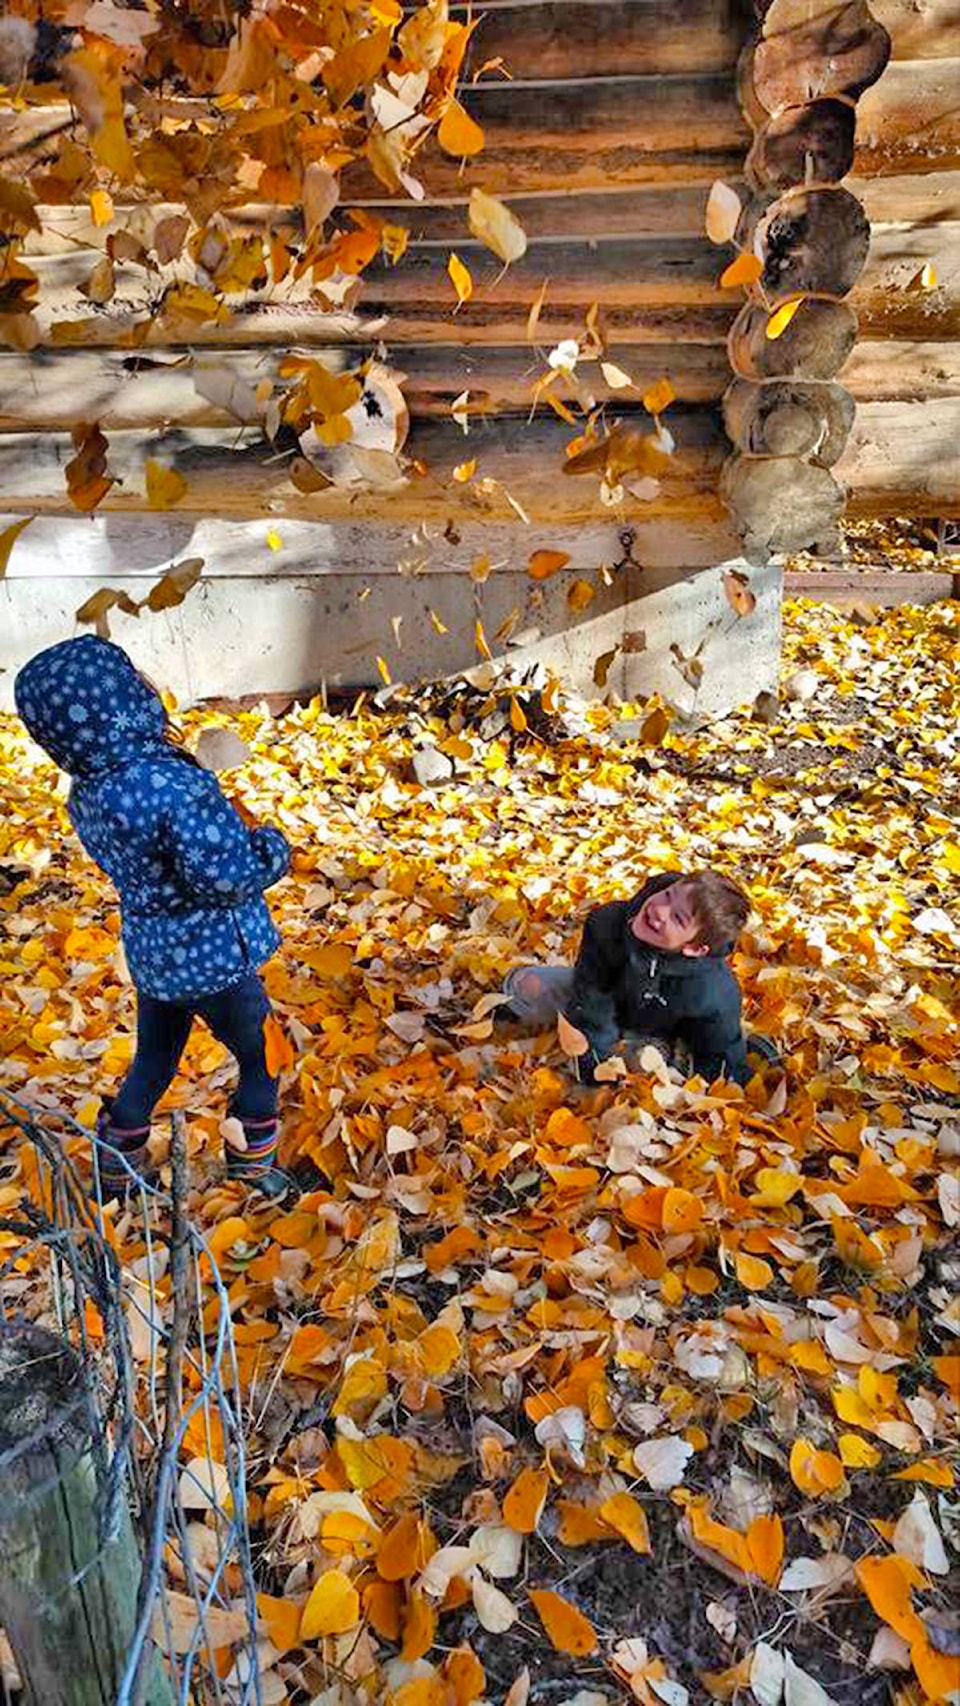 14789152_web1_Micah-playing-in-leaves